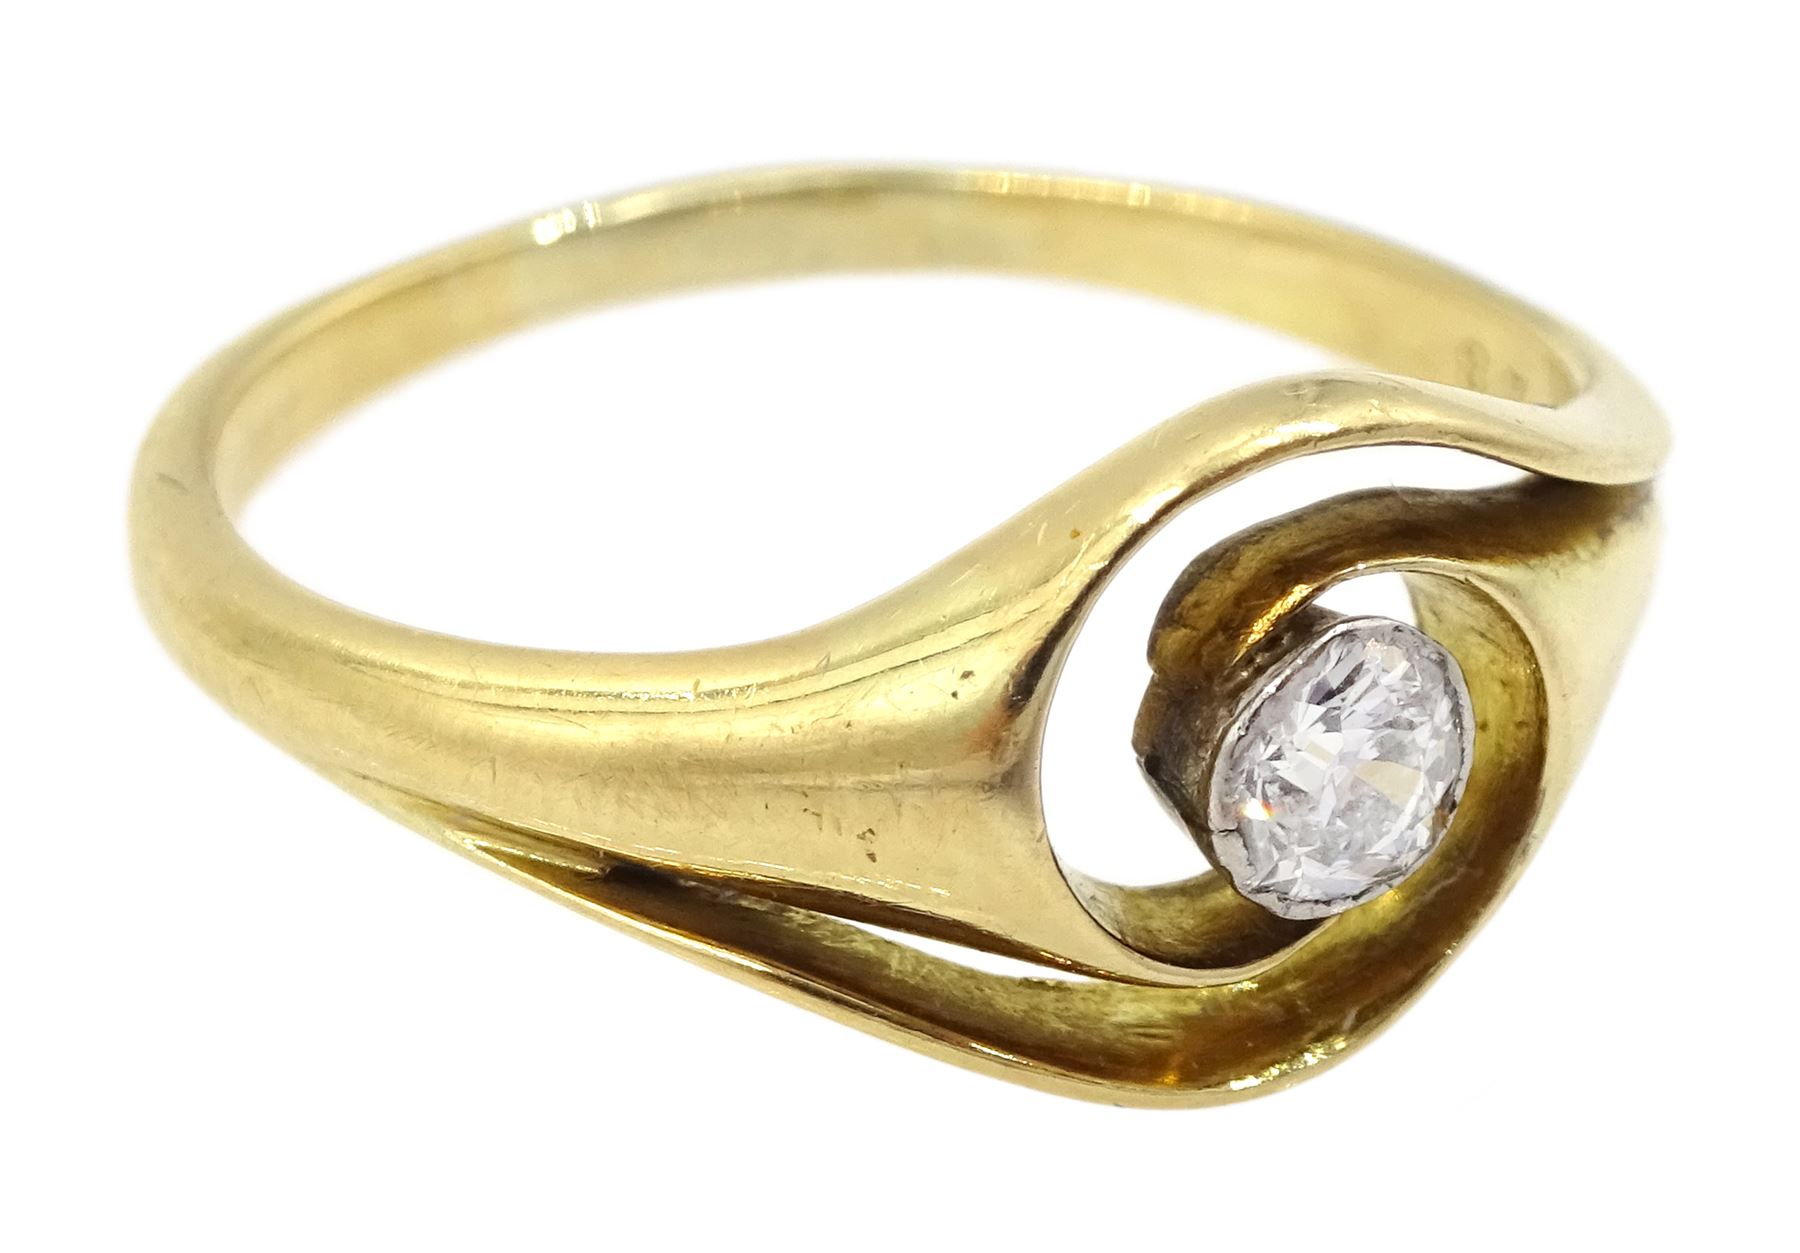 Early 20th century 9ct gold single stone old cut diamond ring - Image 3 of 4